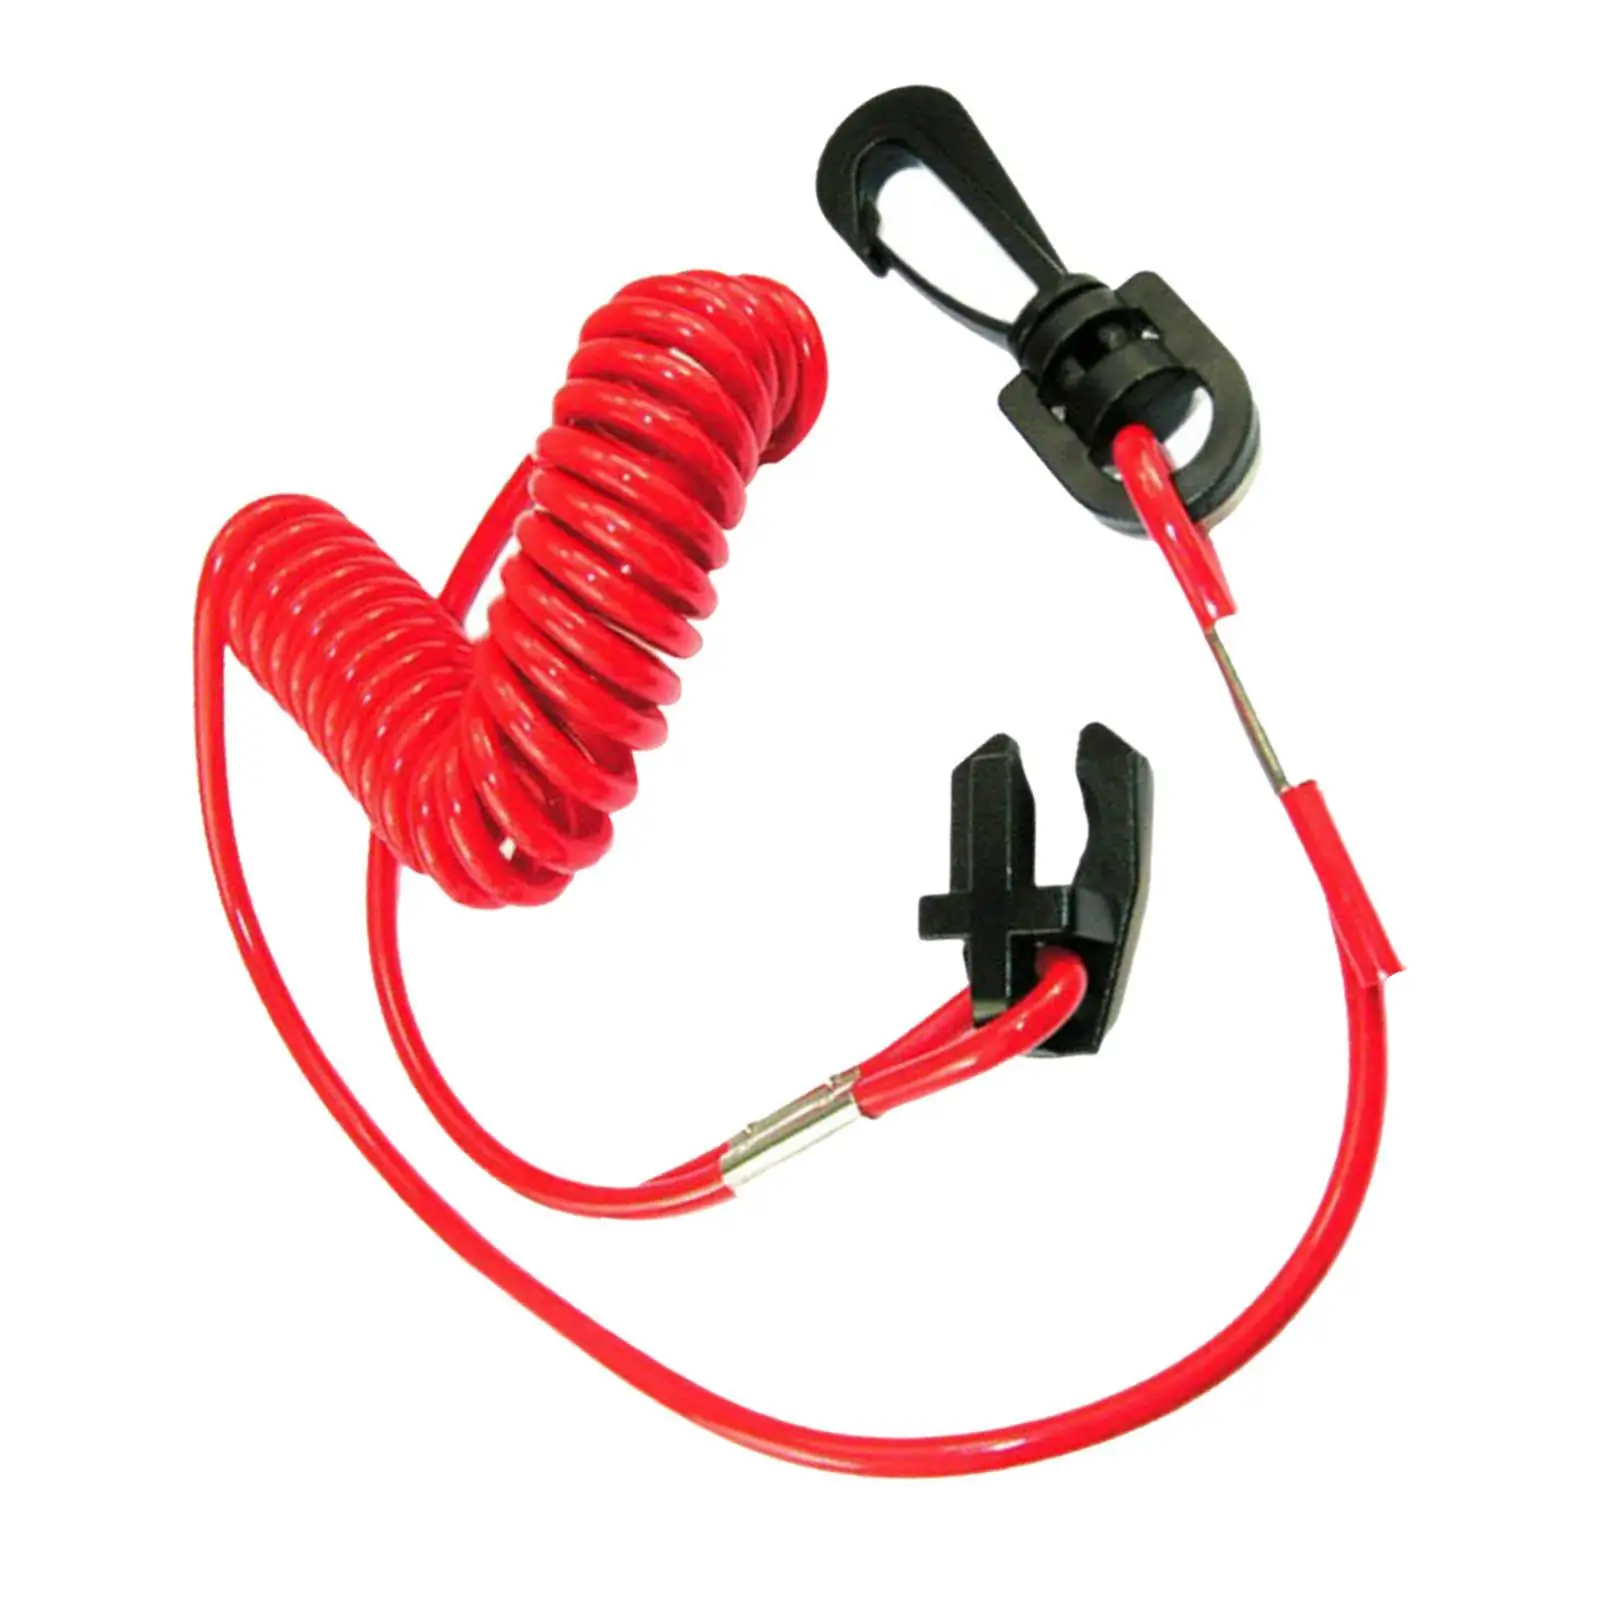 Outboard Engine Motor Safety Kill Stop Switch Lanyard, Ignition Key Switch Safety Tether Cord Red Boat Fits for  for Omc Yachts